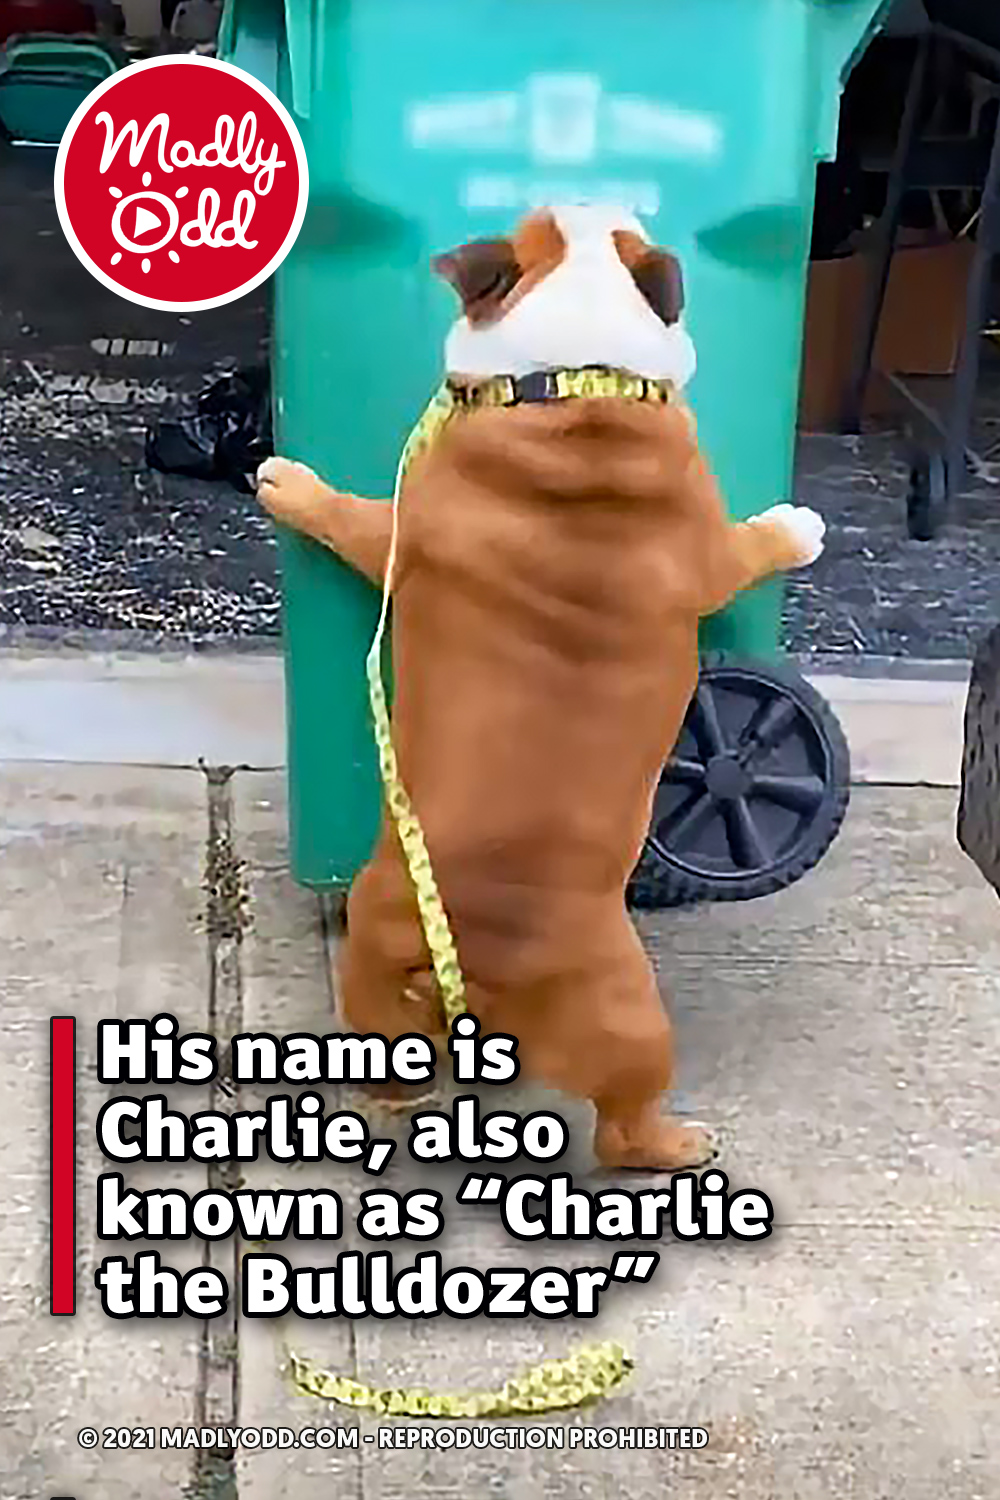 His name is Charlie, also known as “Charlie the Bulldozer”